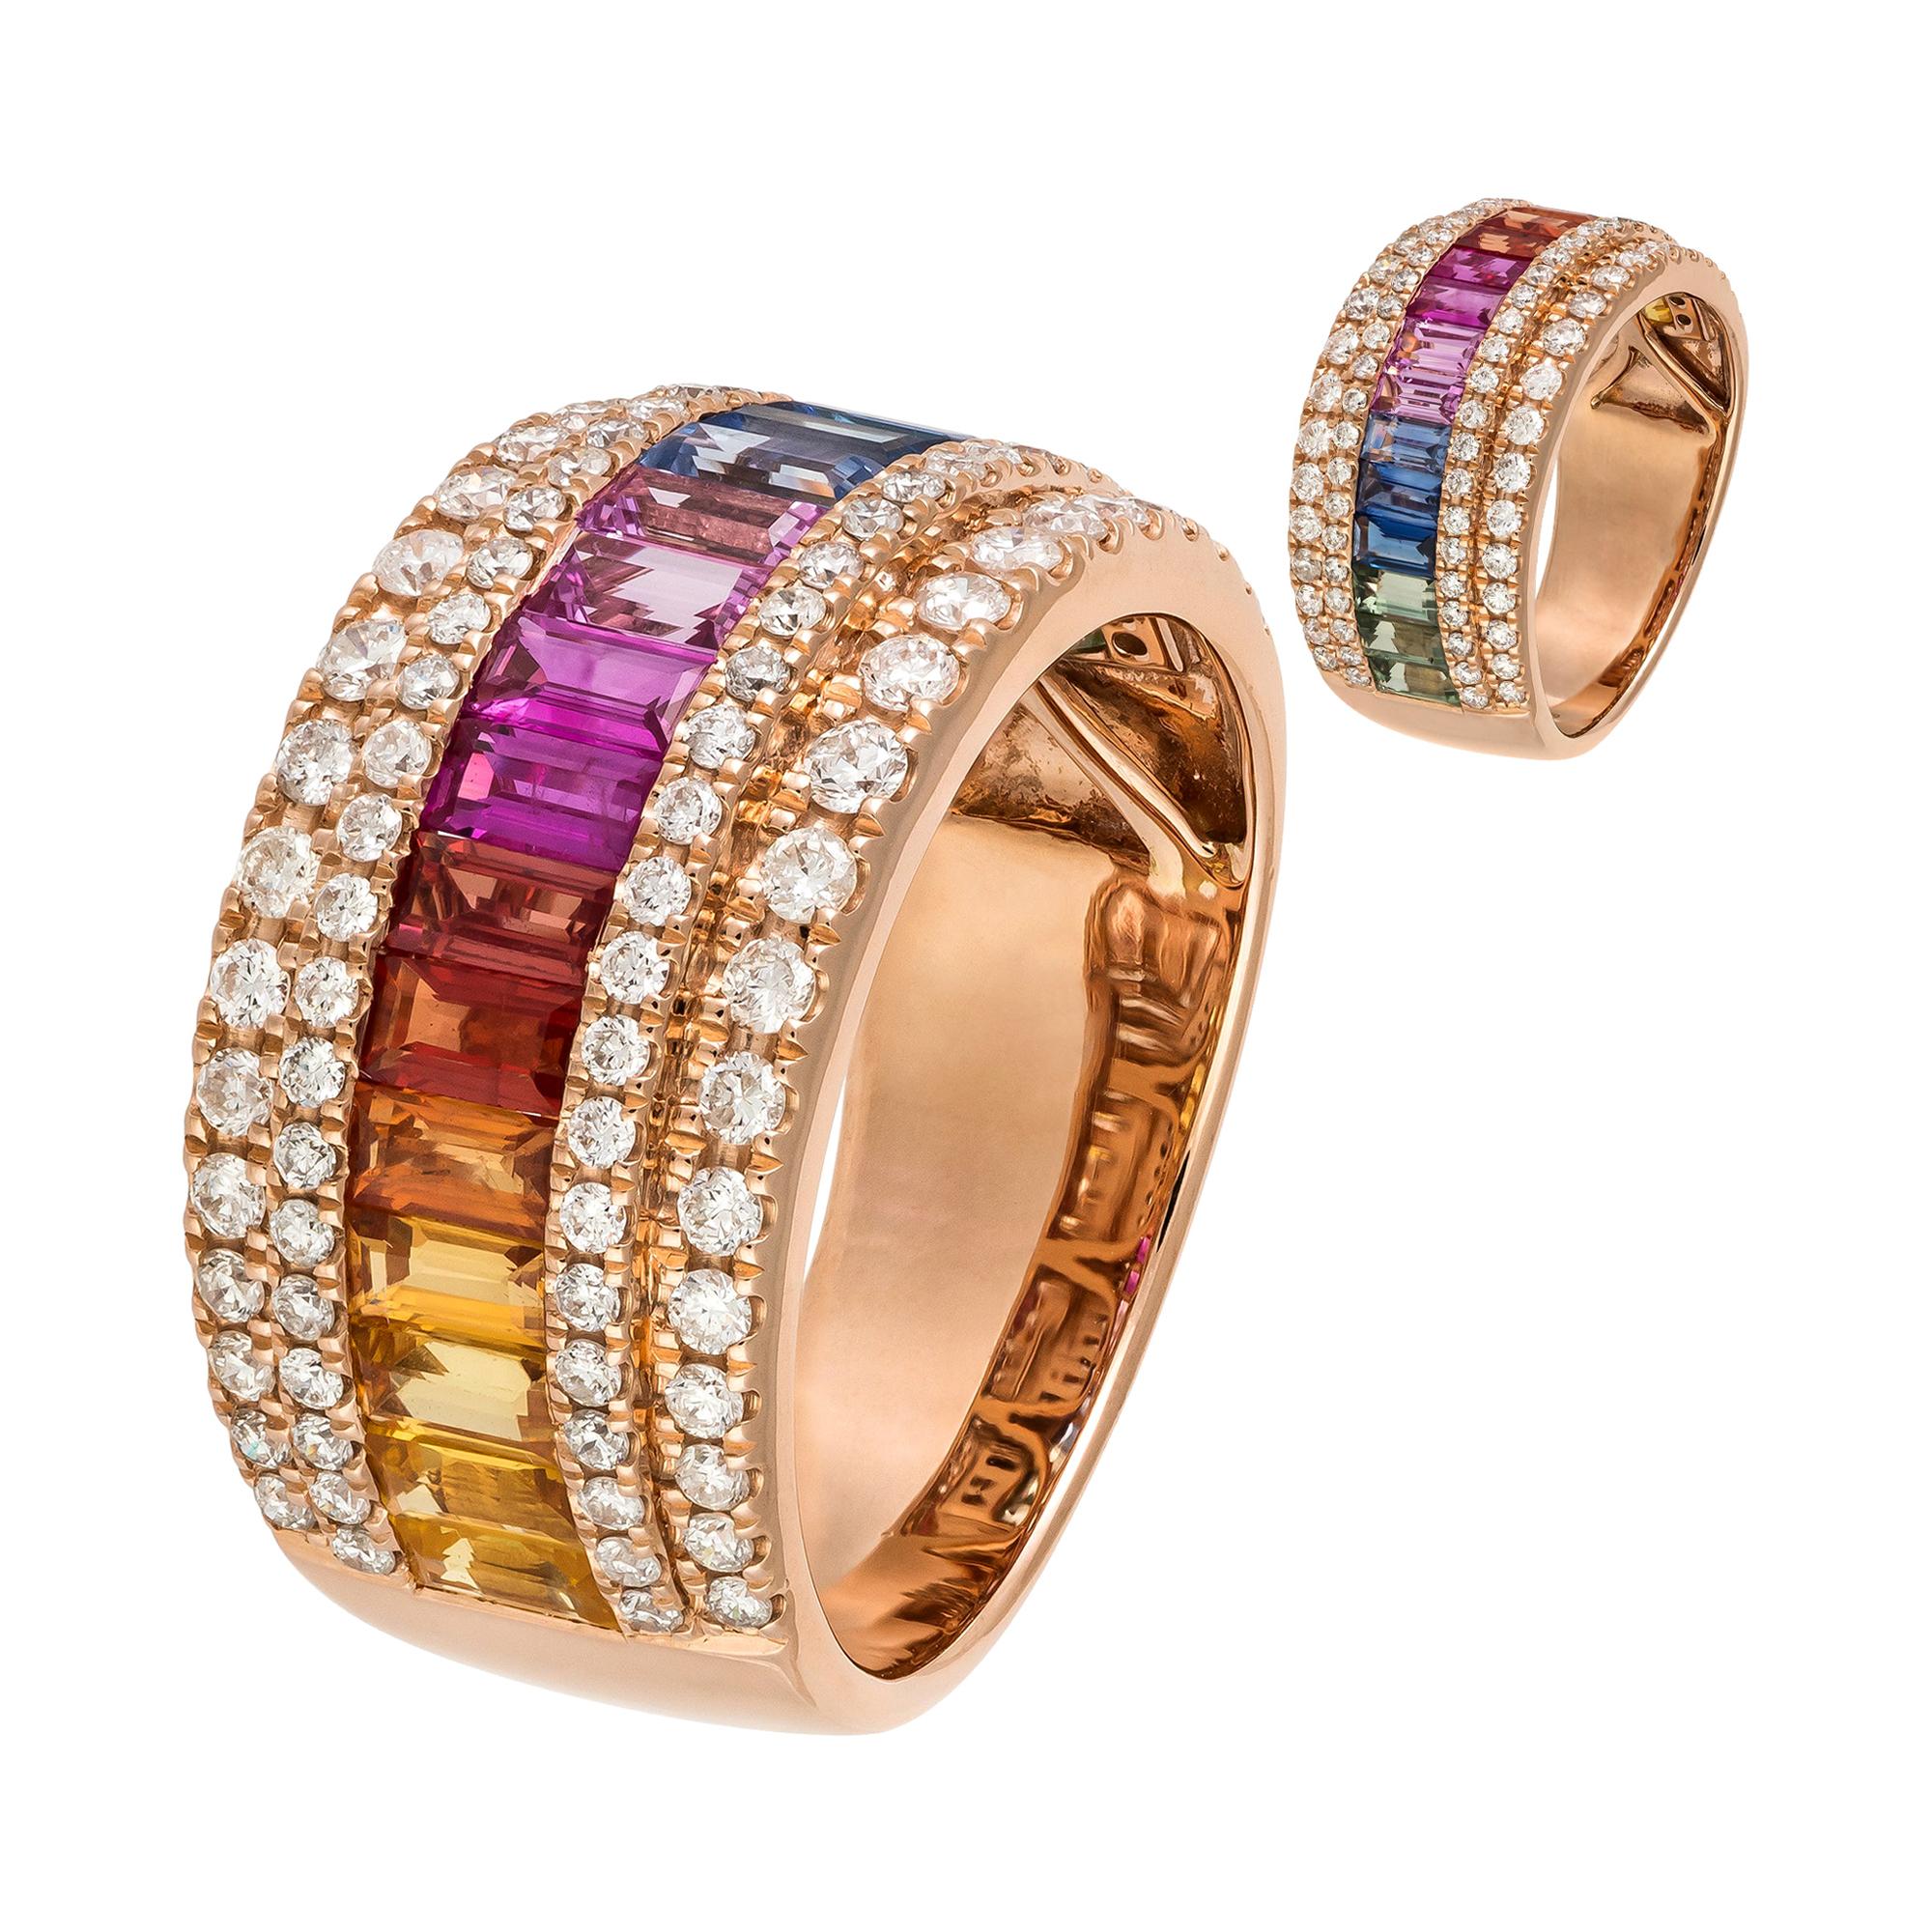 Multisapphire Diamond Rose Colourful Band Ring for Her 18 K Gold For Sale